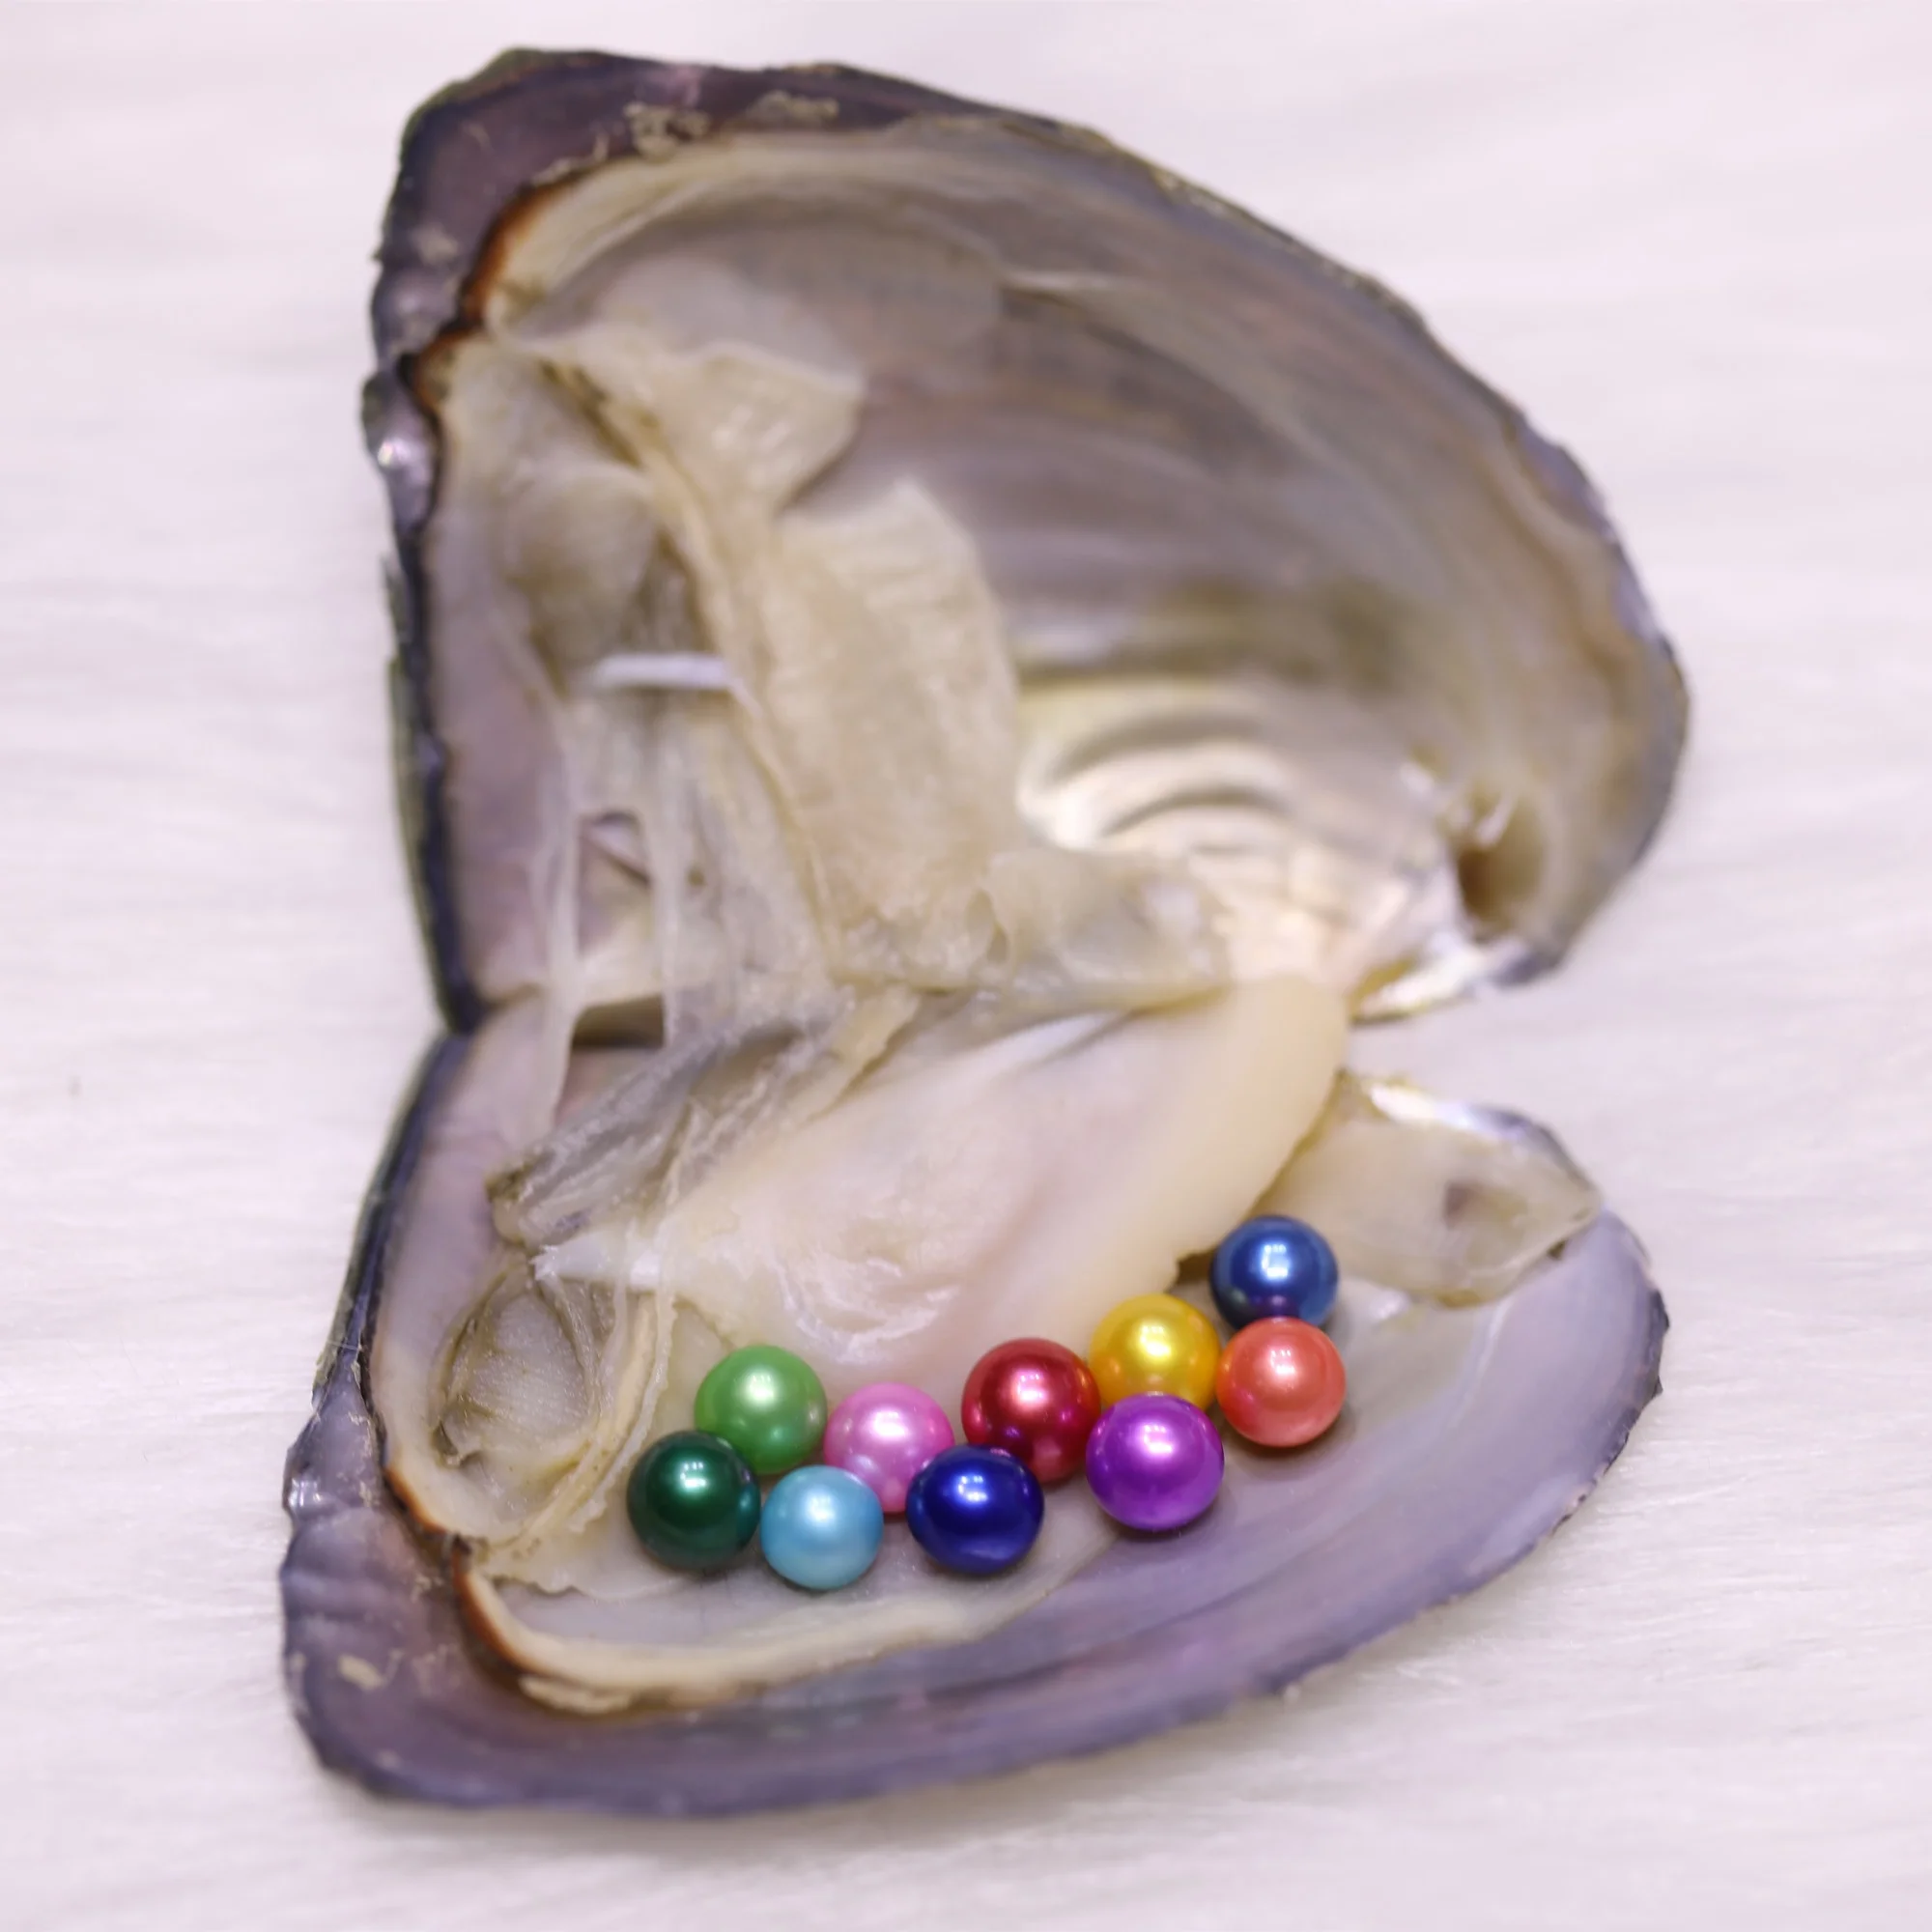 

AAA+ grade 6-7mm Mixed 34 Colors 10 Pearls in 1 Freshwater oyster, Round Natural Freshwater Pearl in Oysters shell Vacuum-packed